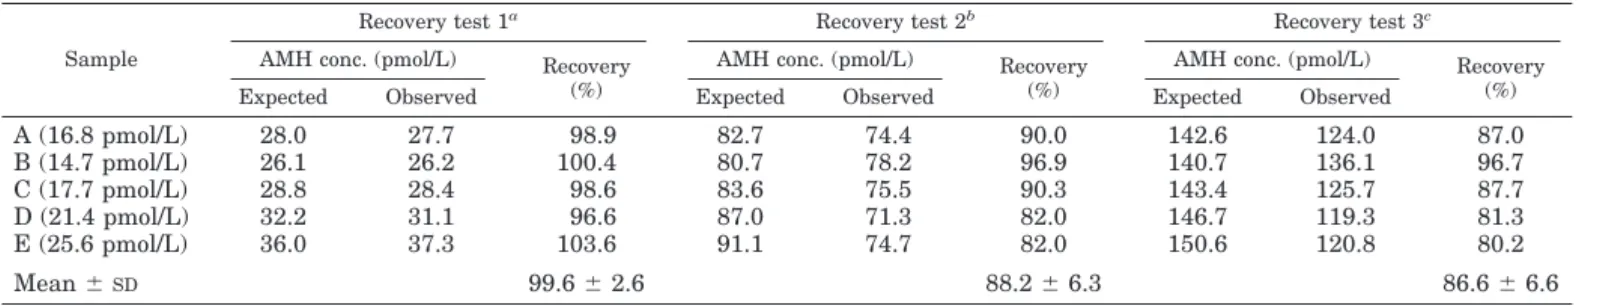 TABLE 3. Validation of the ultrasensitive AMH/MIS ELISA: